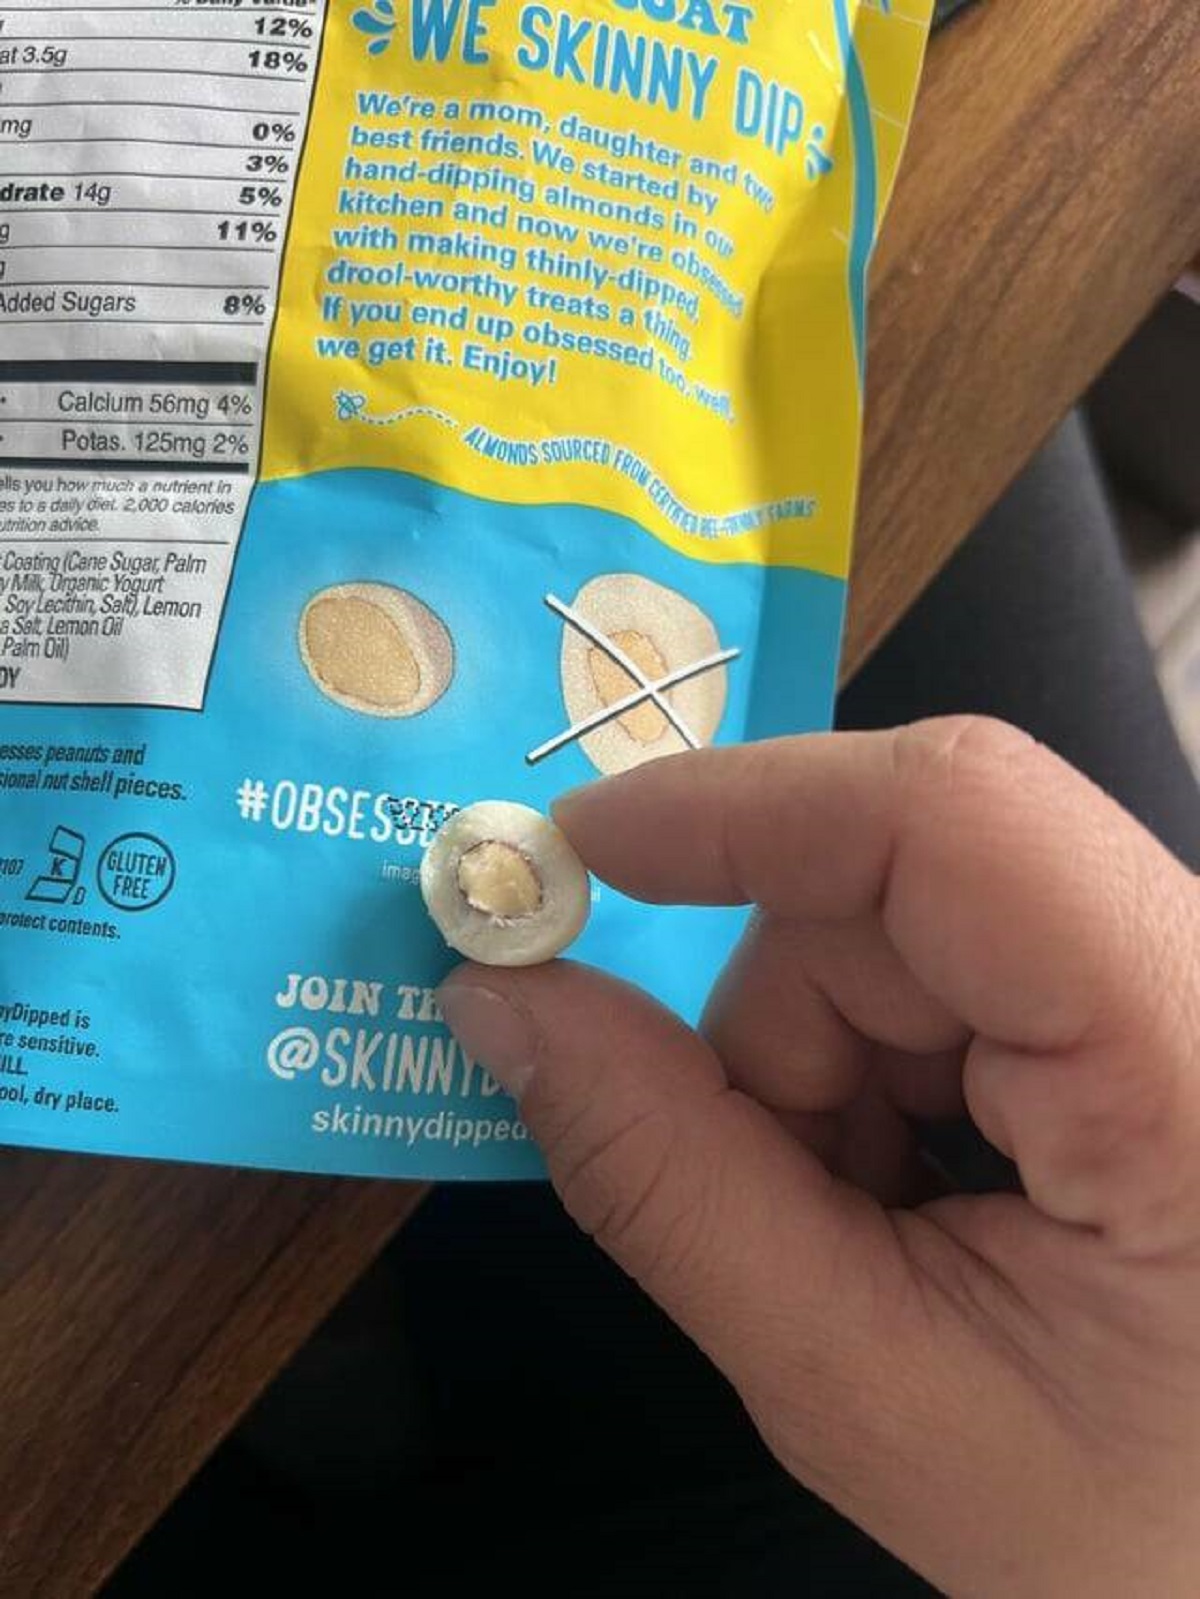 "My Skinny Dipped Almonds are regular dipped, according to the diagram on the bag"